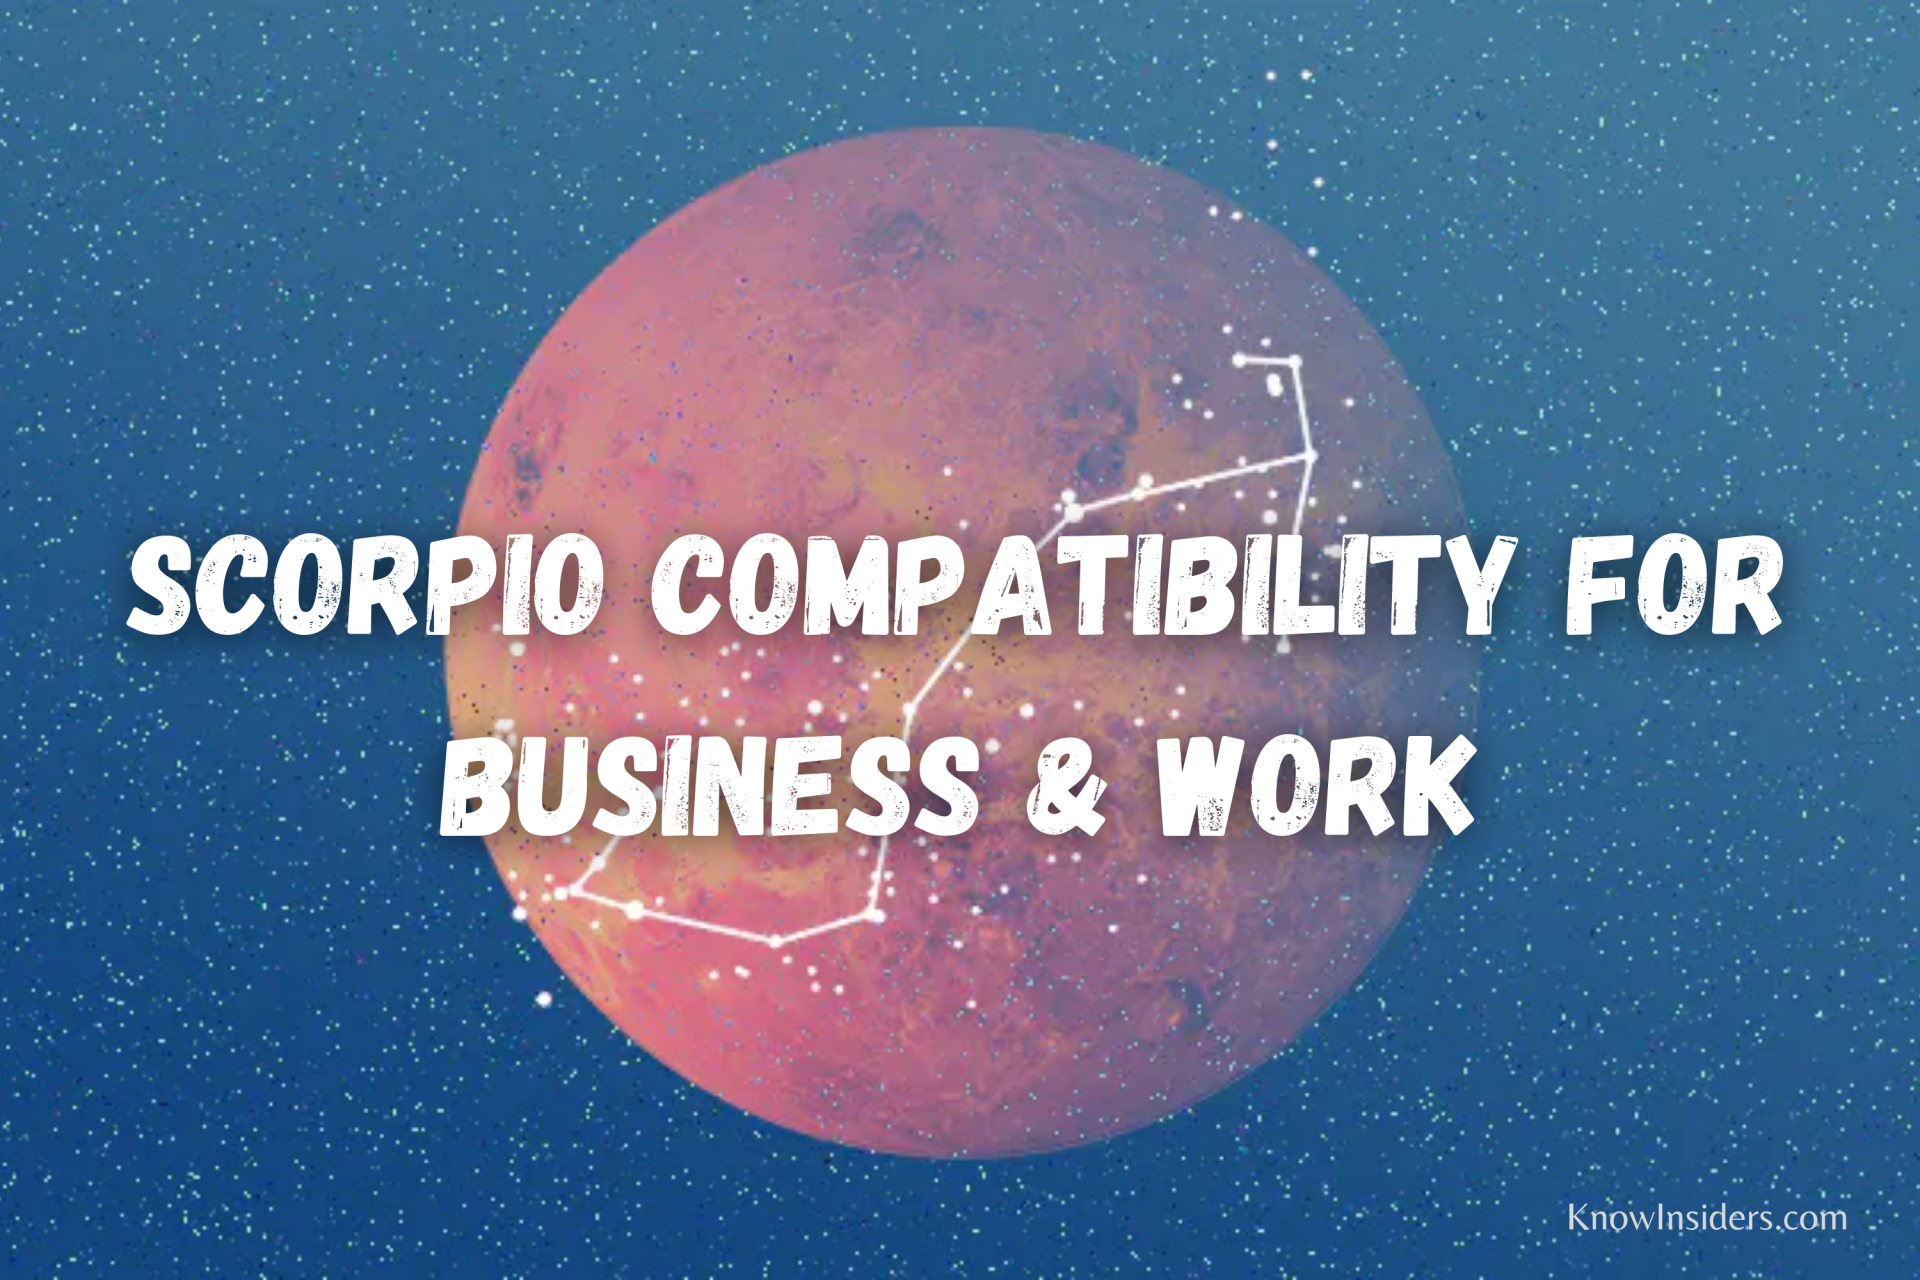 SCORPIO - Top 3 Most Compatible Zodiac Signs in Business & Work